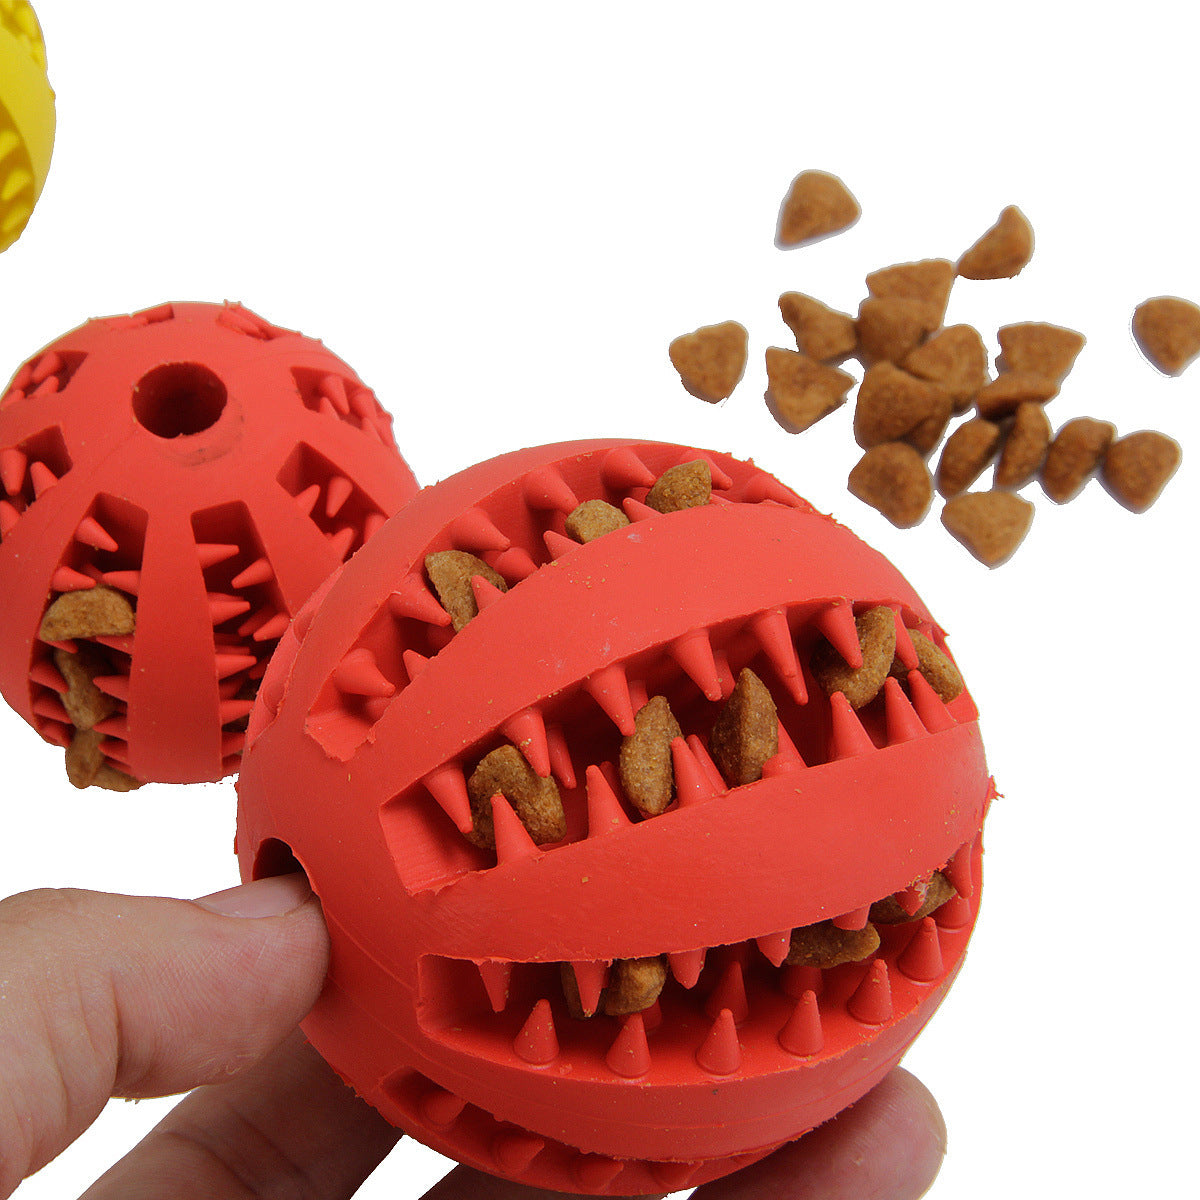 Watermelon teeth ball pet dog toy ball bites clean tooth glossy ball pet rubber ball dog toy leakage